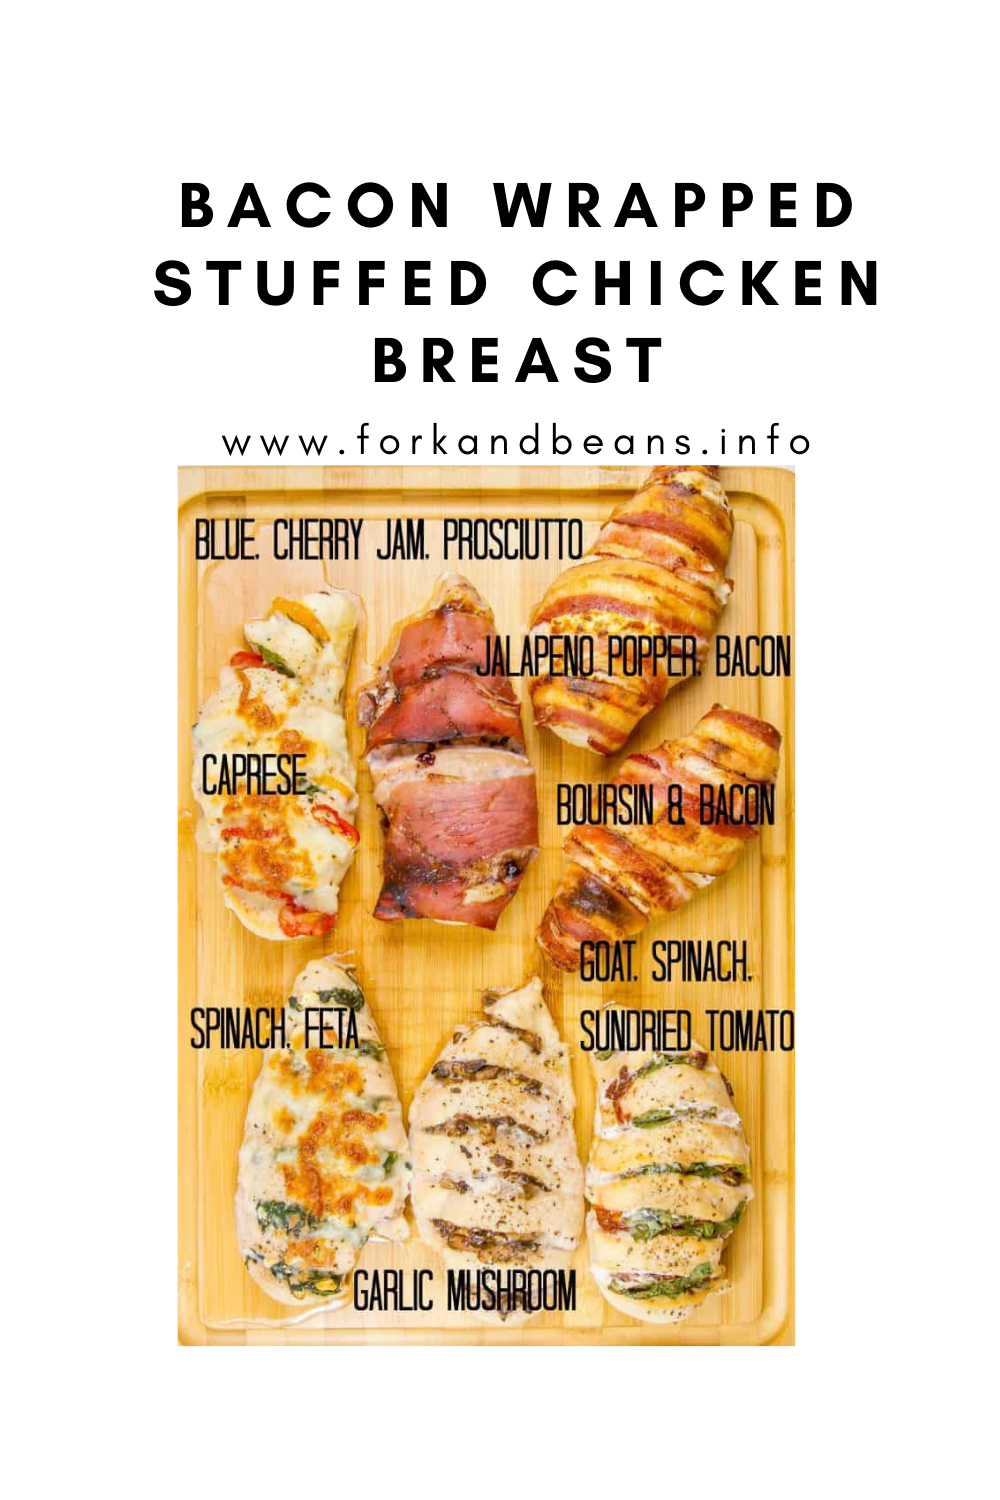 7 Ways to Easy Baked Stuffed Chicken Breast